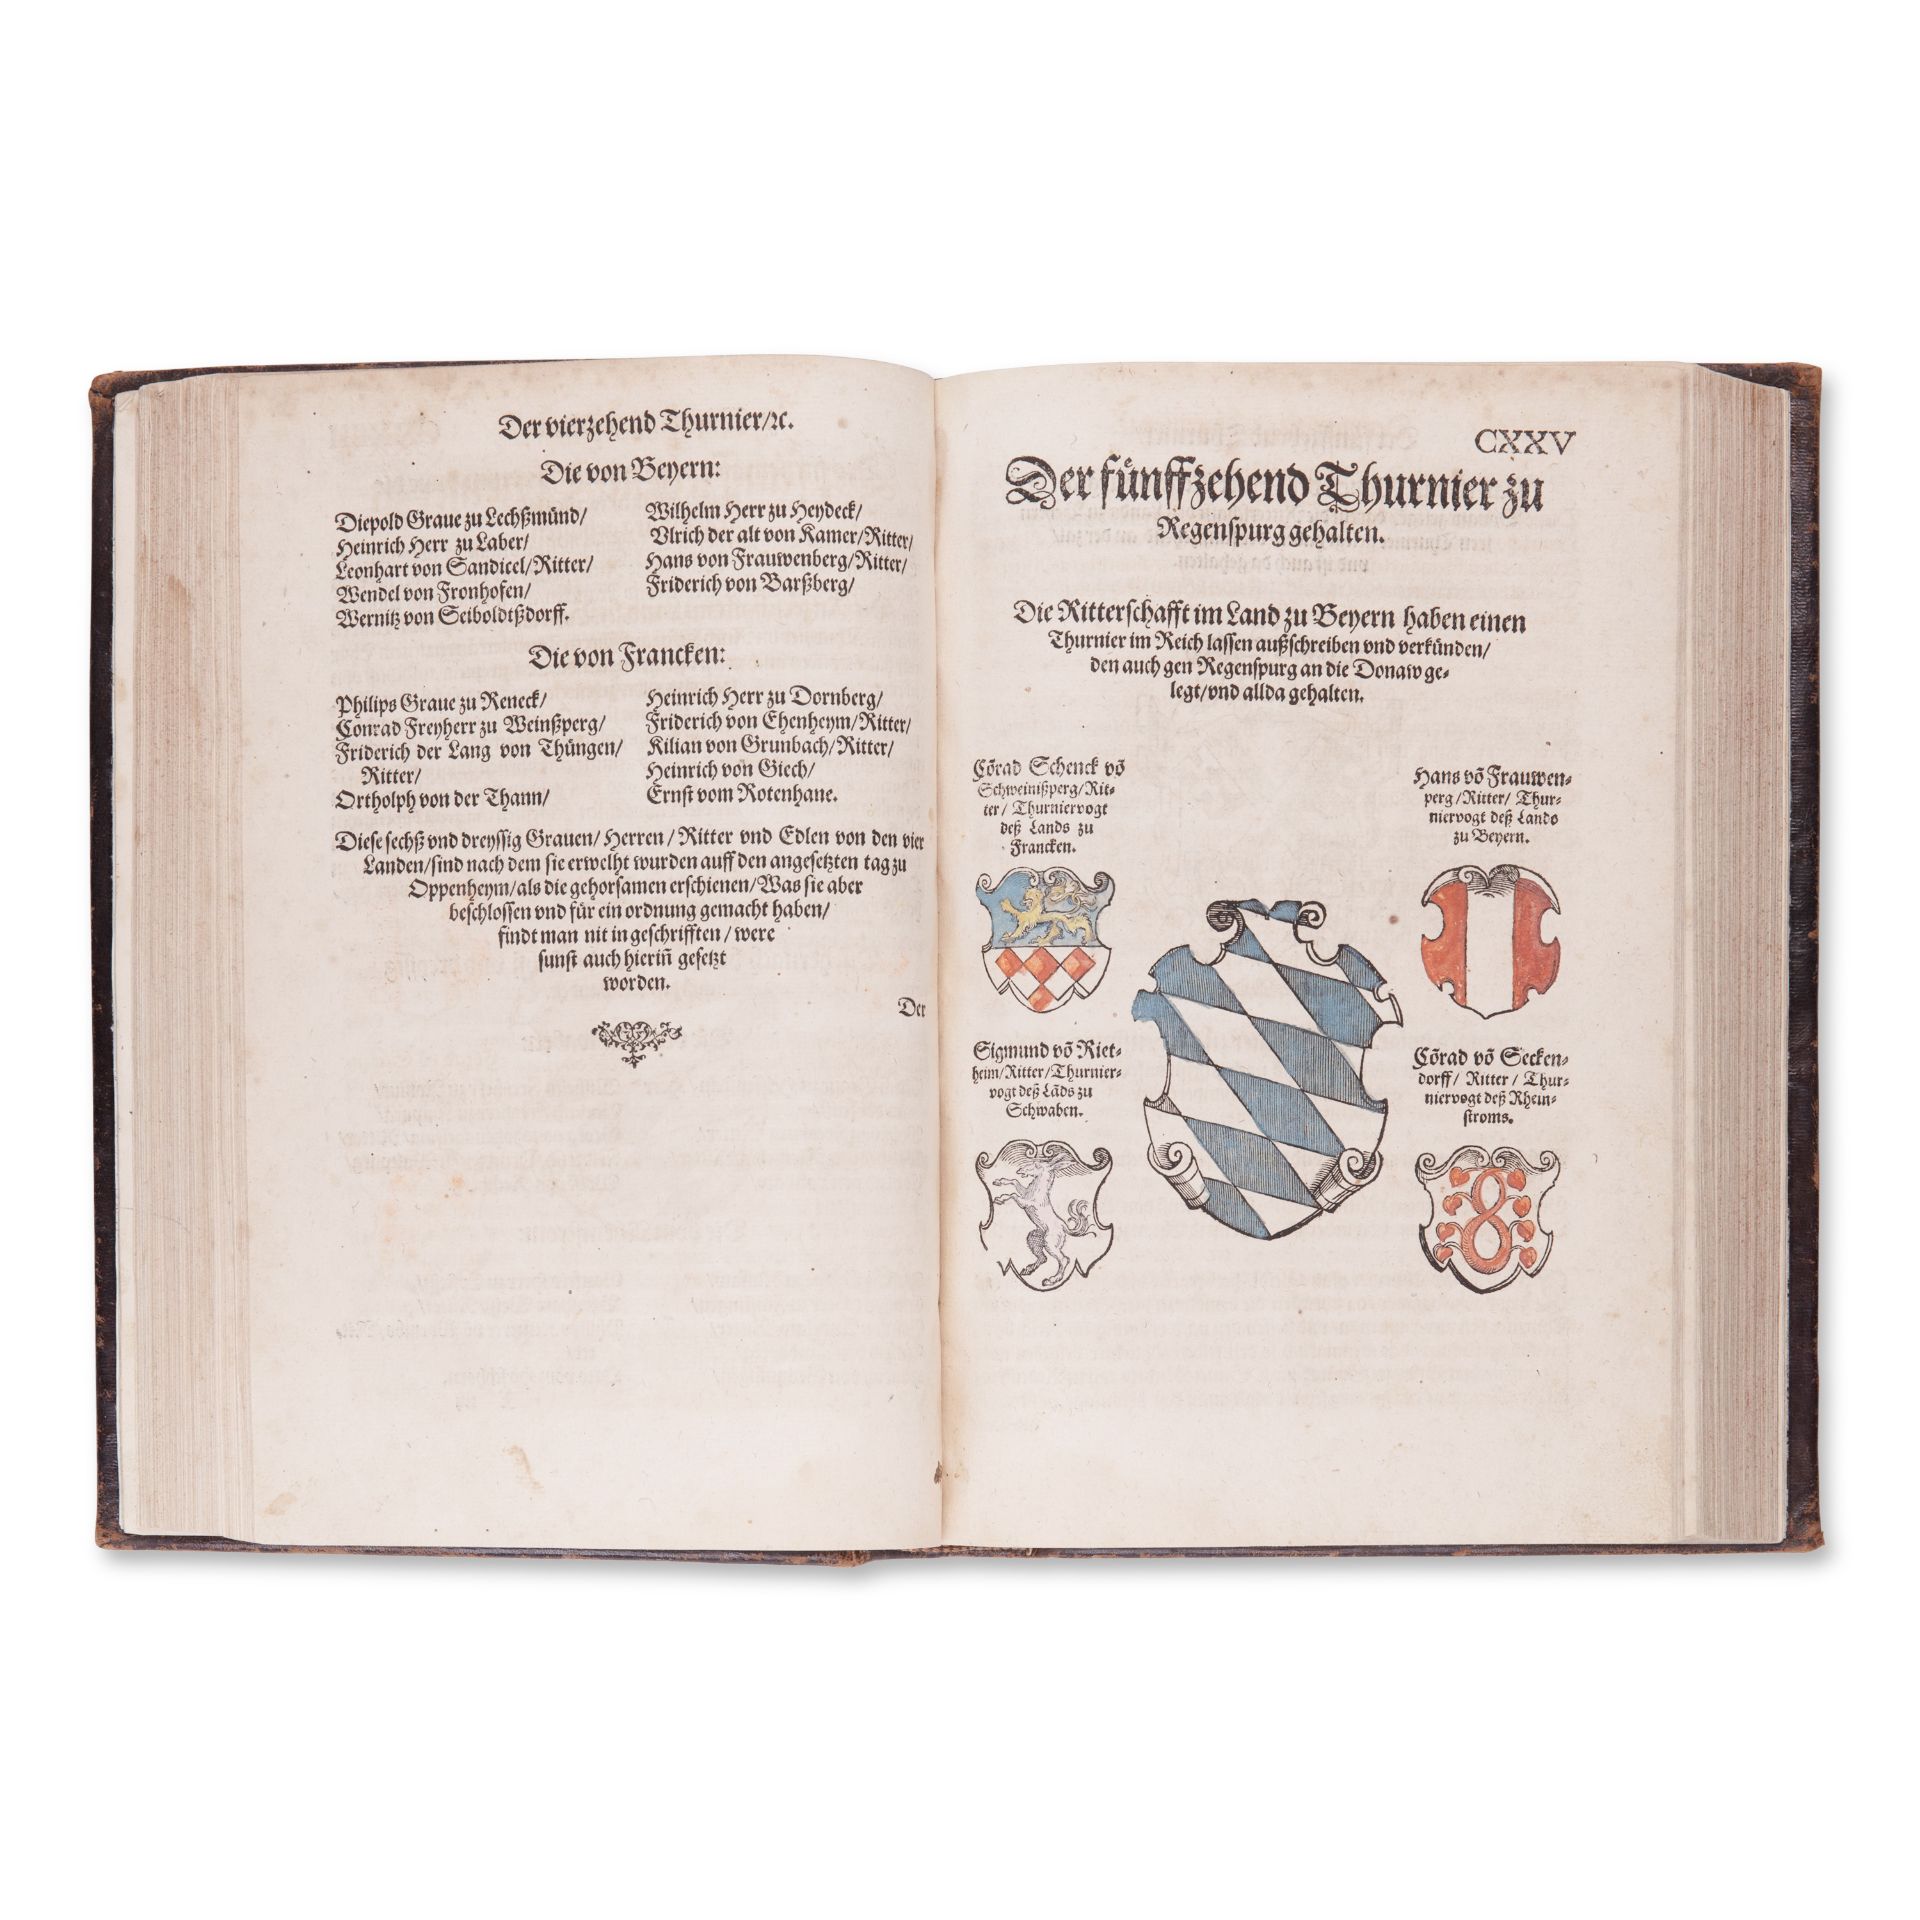 [RUXNER, Georg] (1494?-1526?): Thurnier Buch - Image 3 of 4